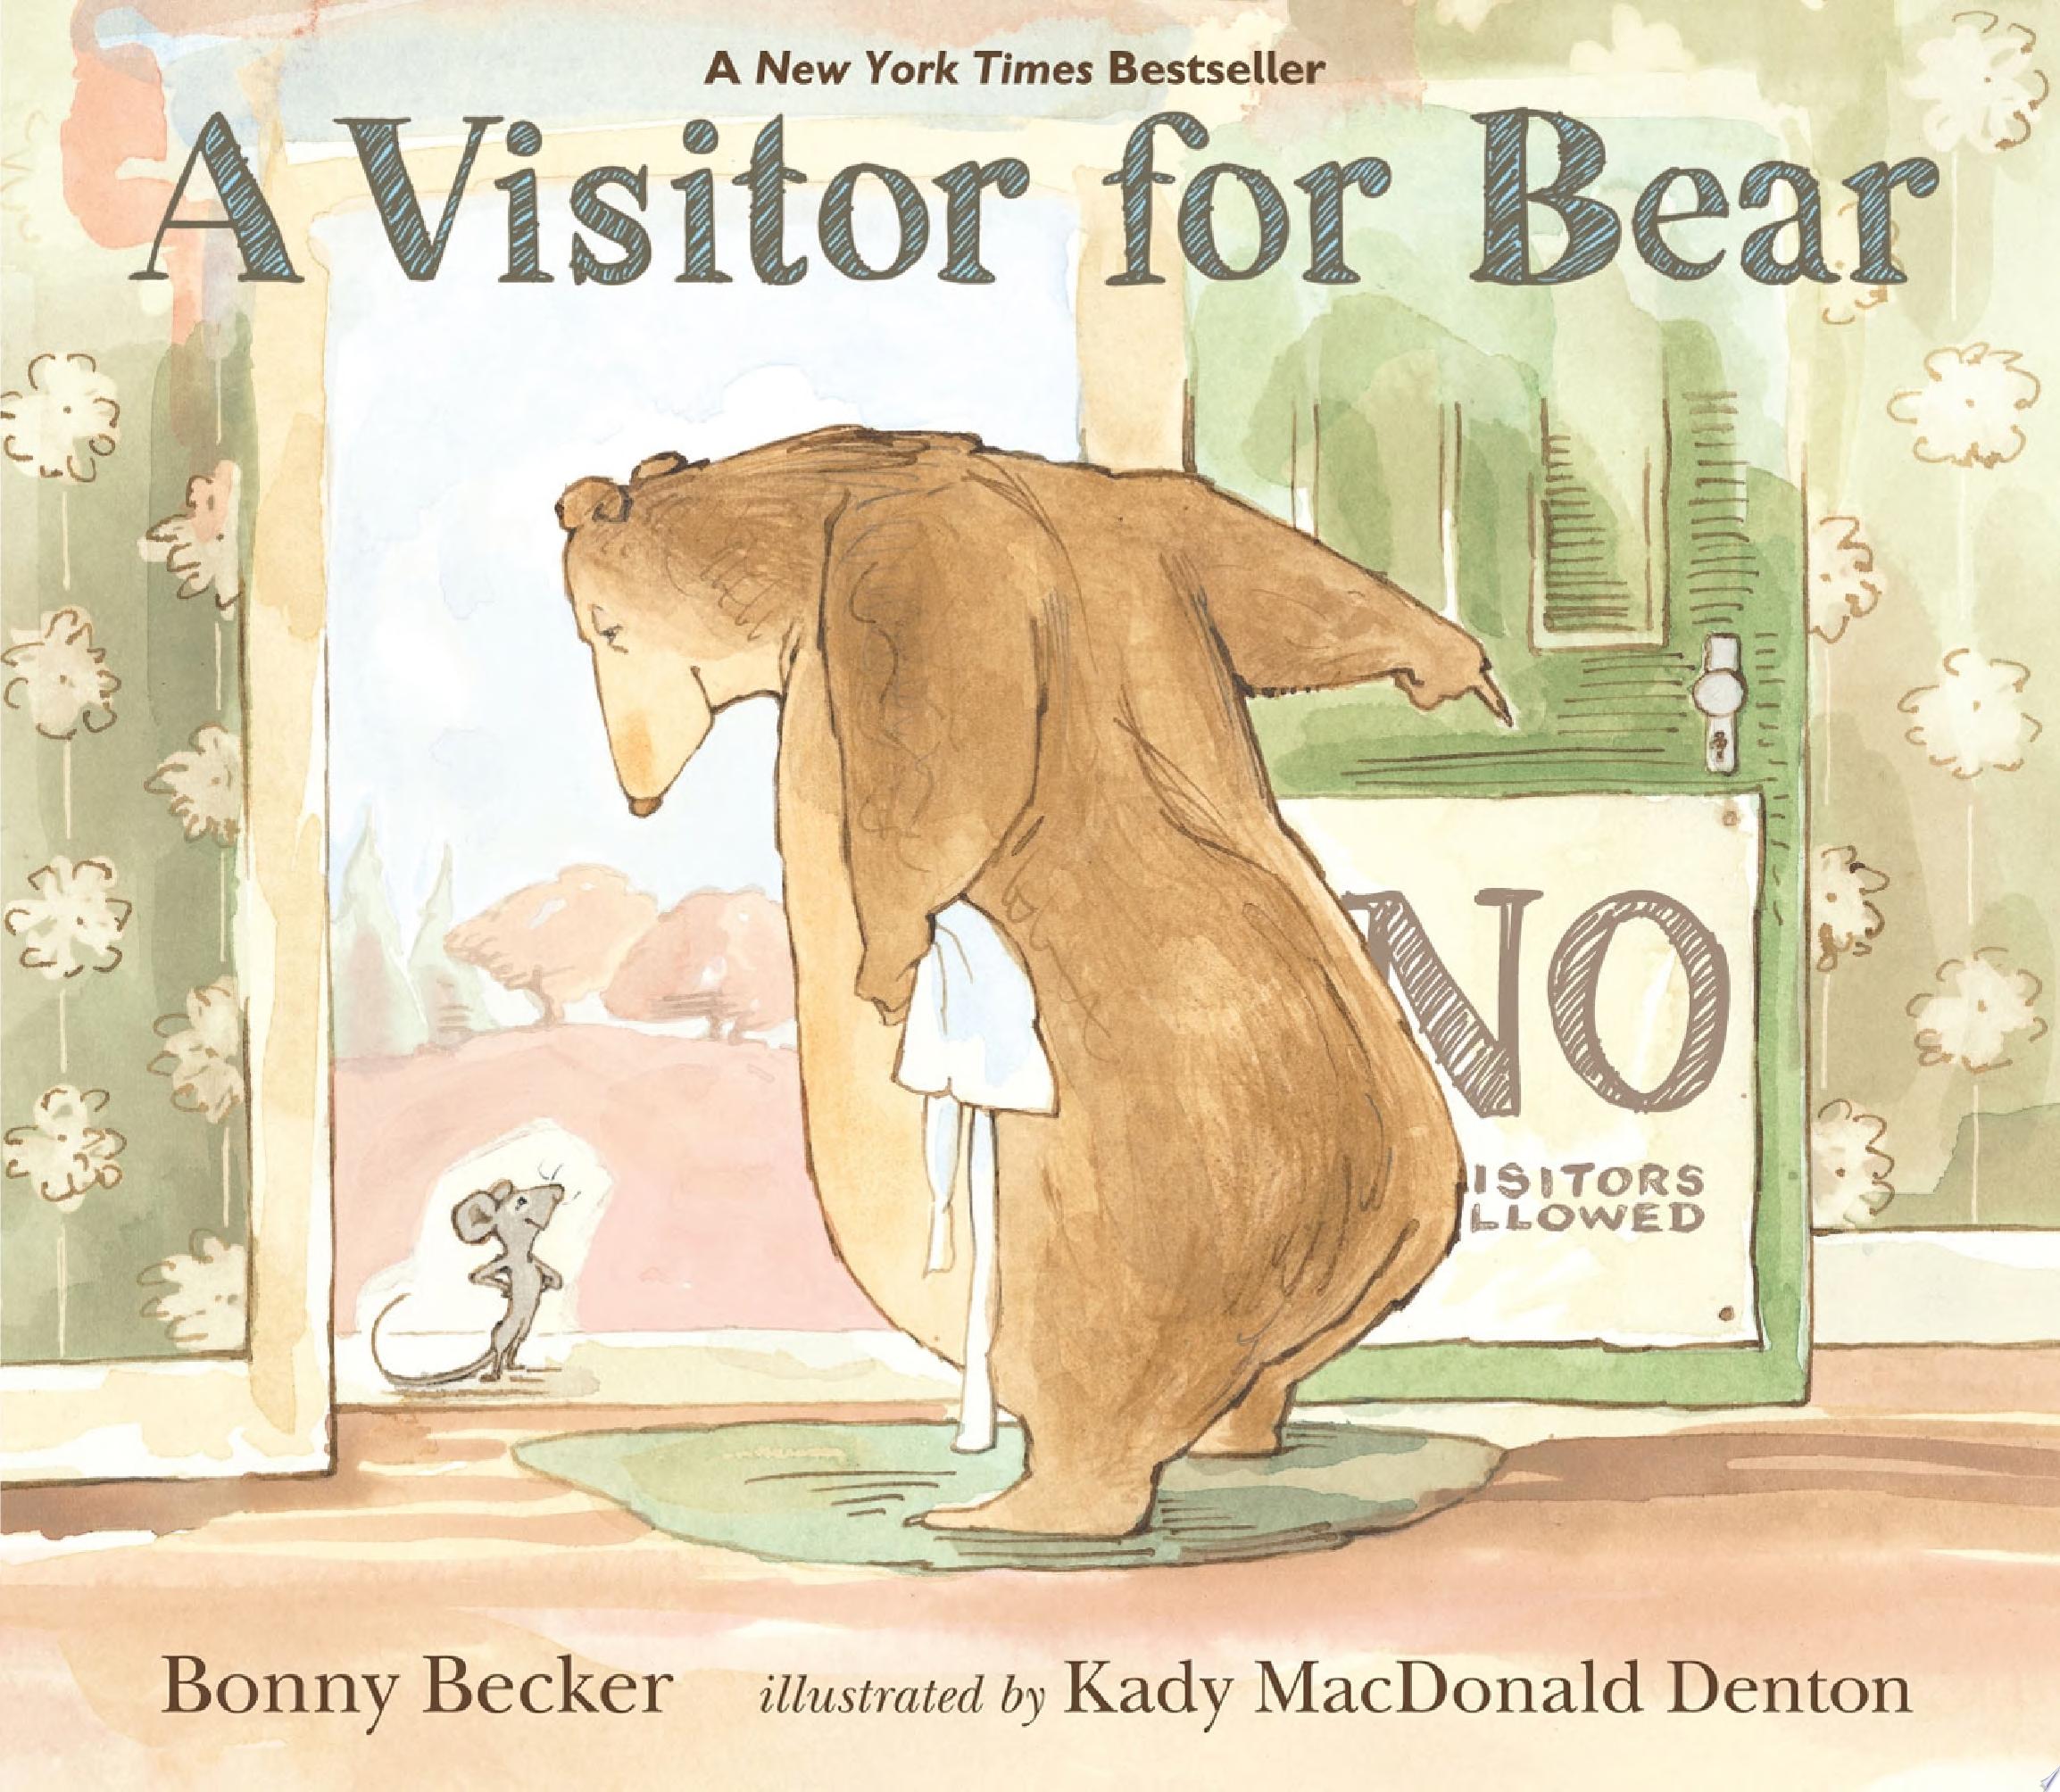 Image for "A Visitor for Bear"